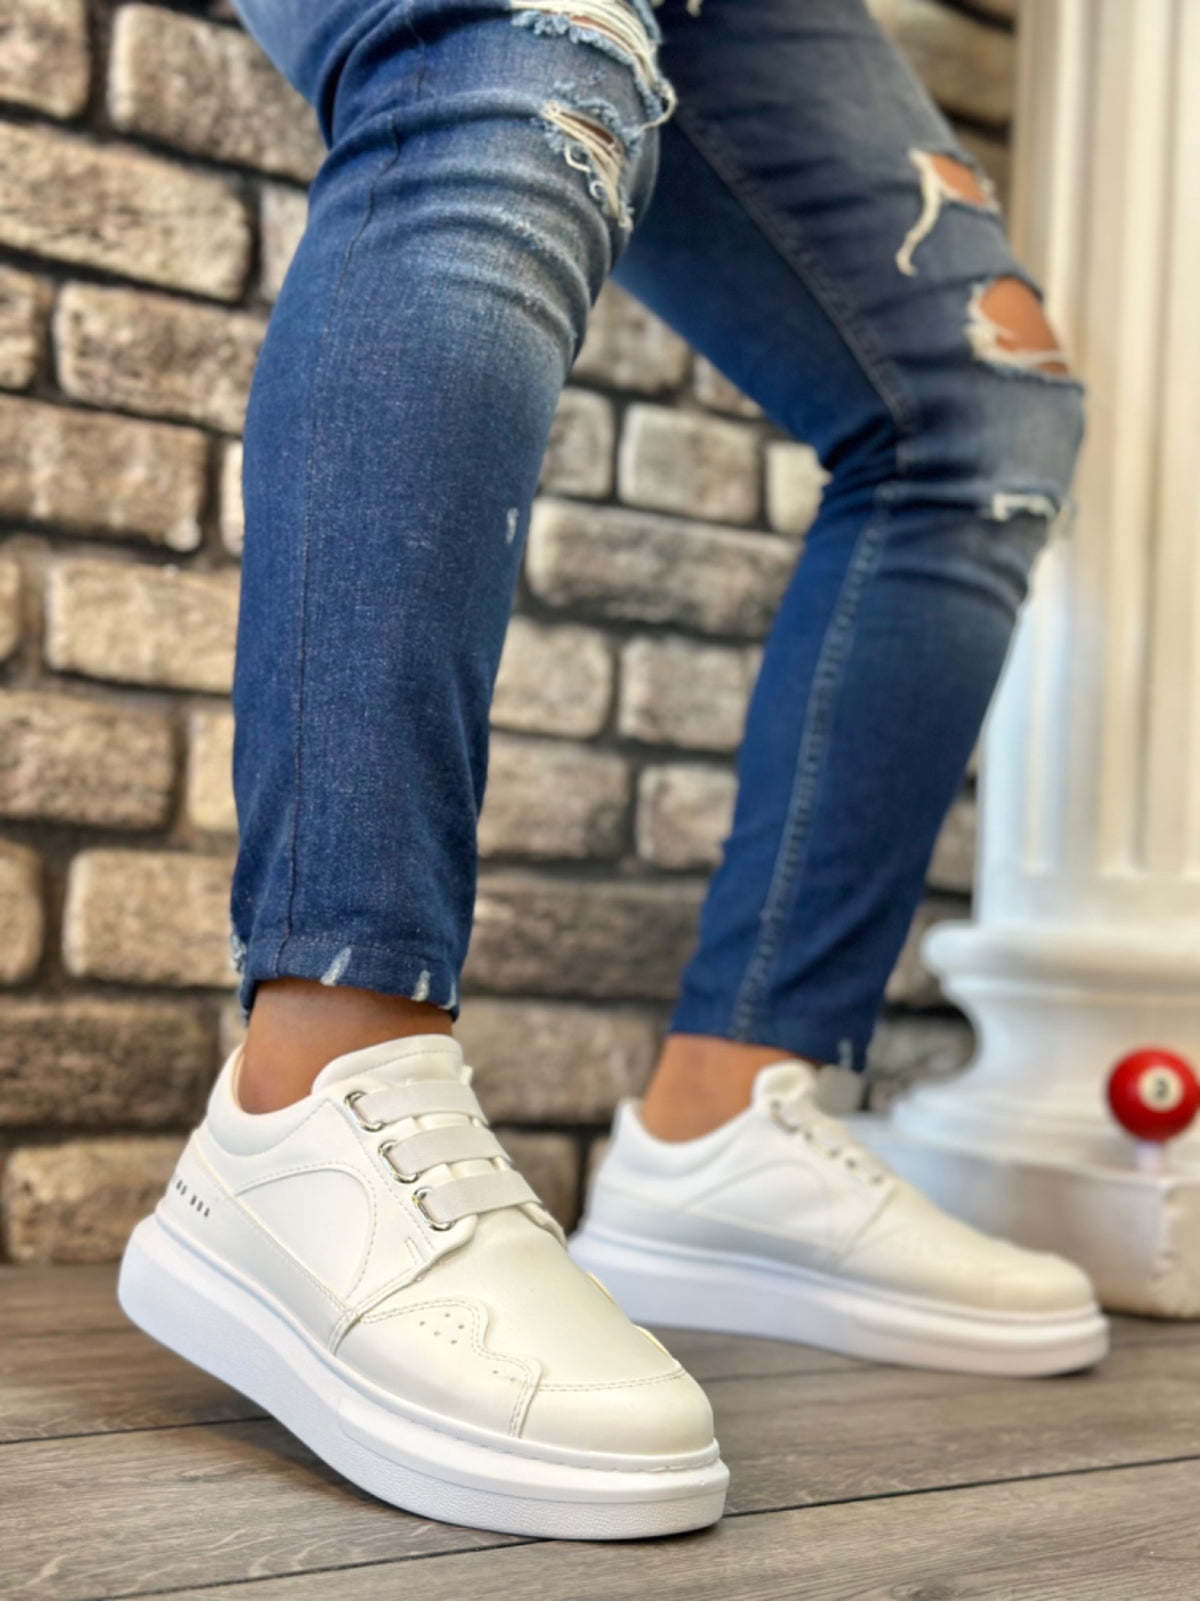 BA0302 Thick Sole Lace-Up Style Casual White Men's Sneakers Shoes - STREETMODE™